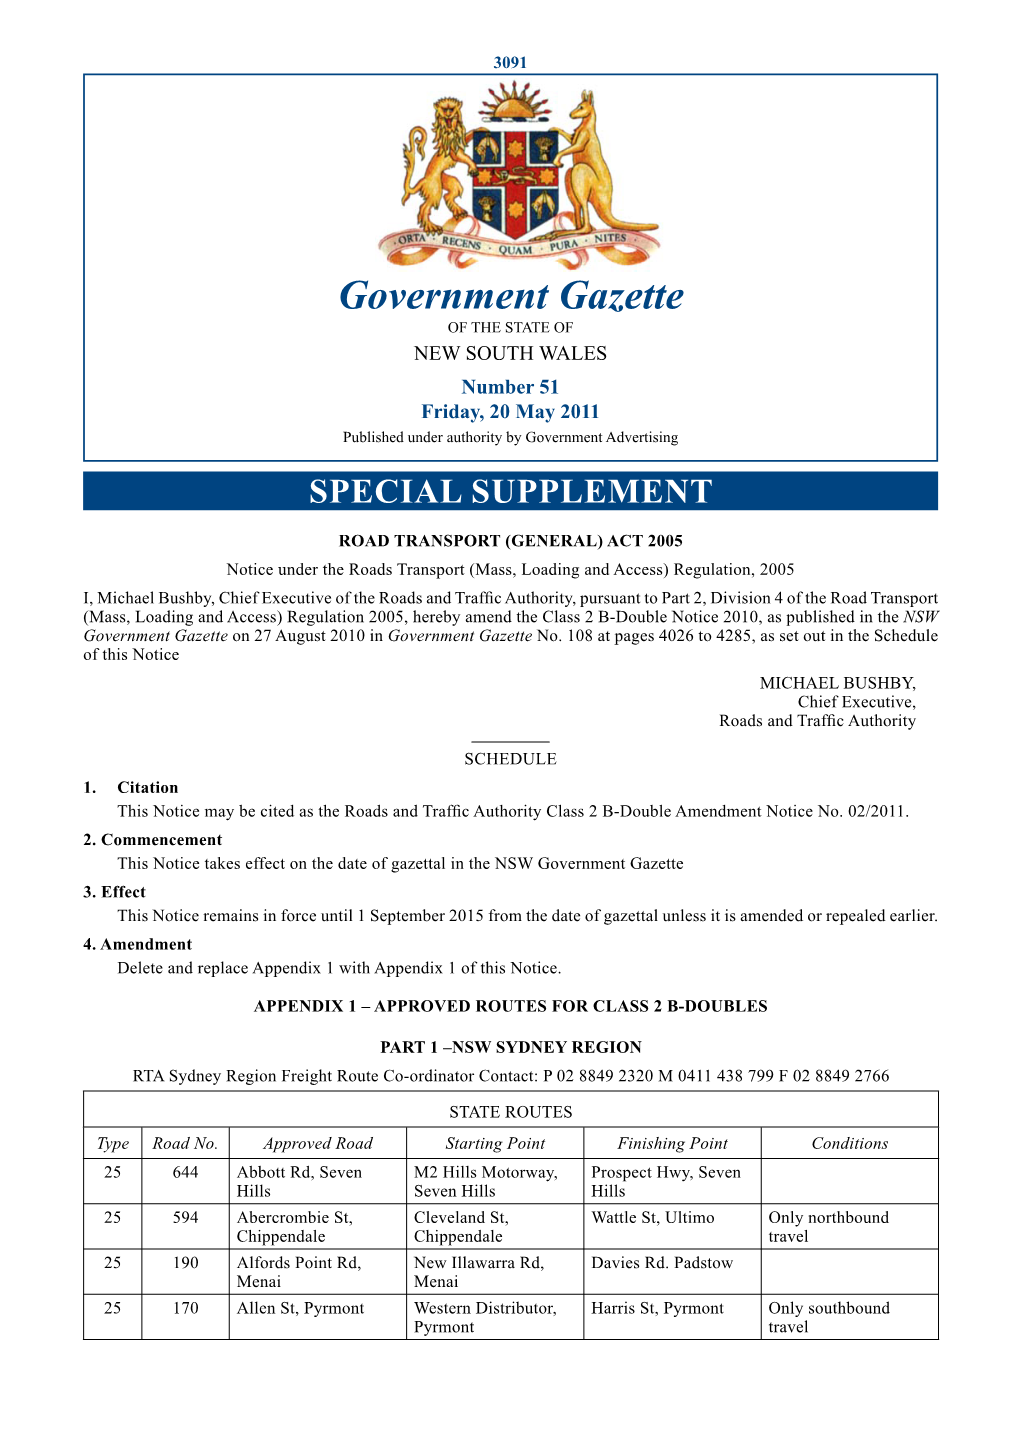 Government Gazette of 27 May 2011